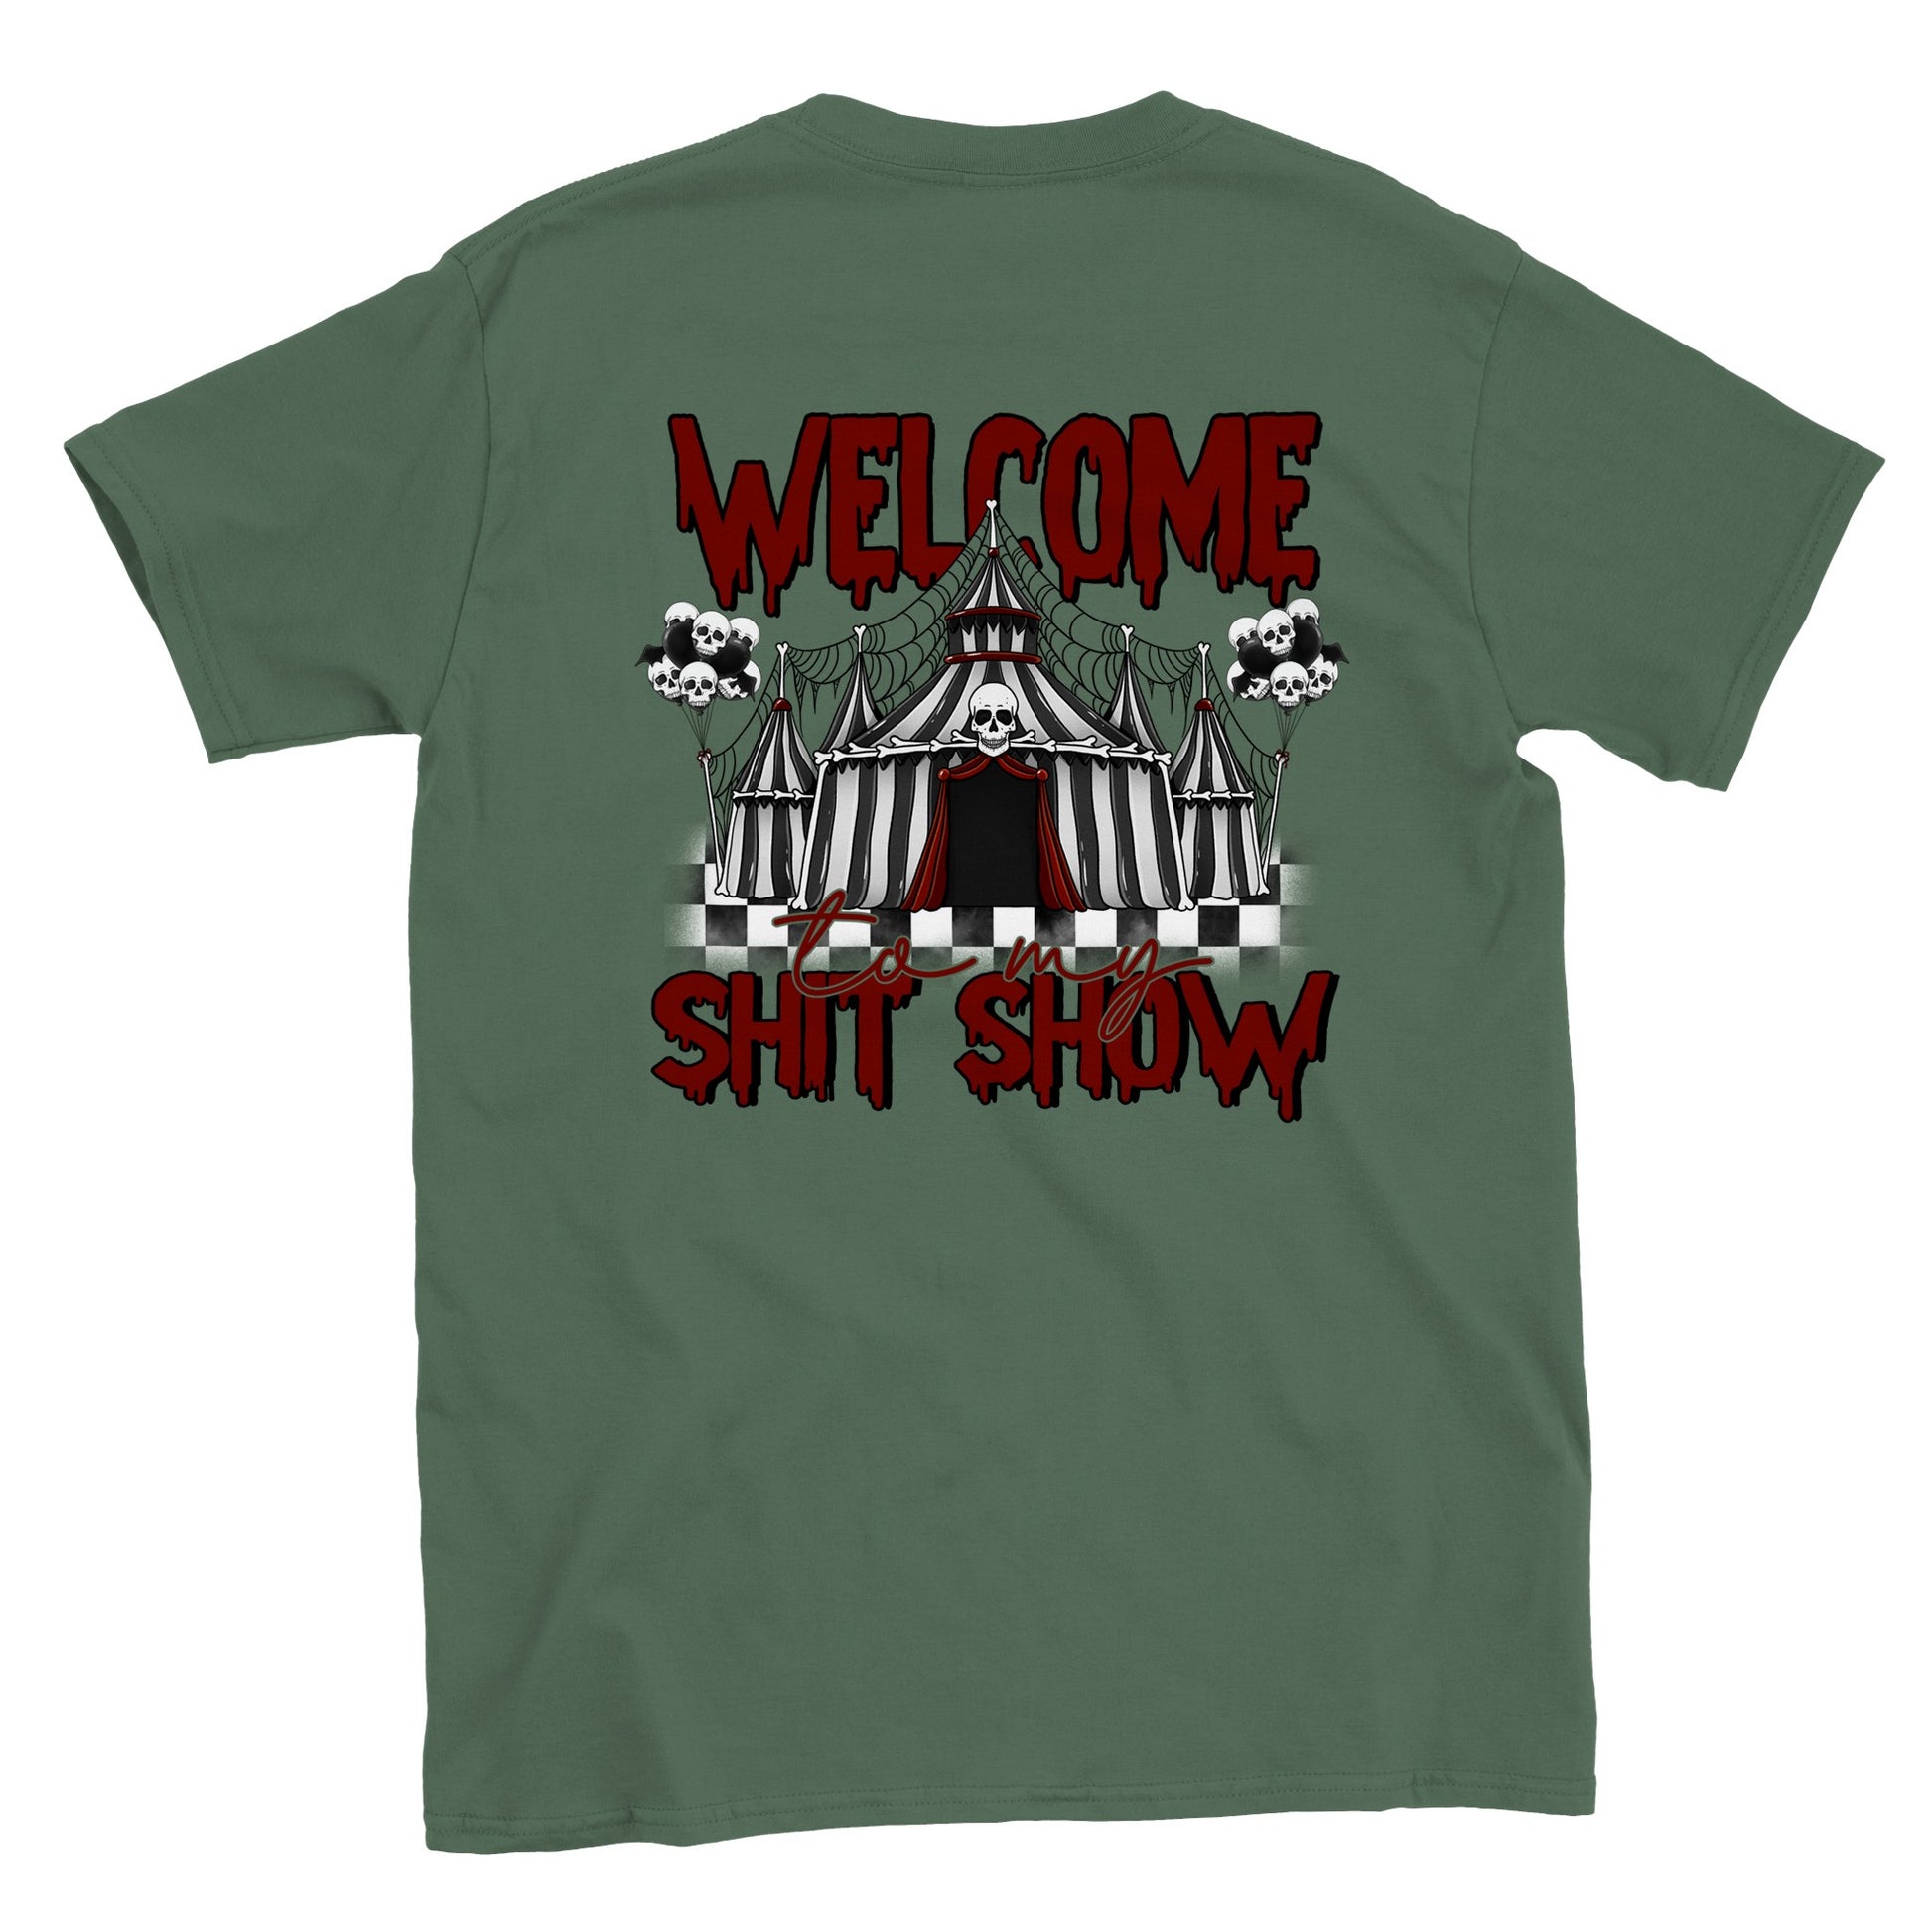 Welcome to my Sh!t Show T-shirt - Mister Snarky's